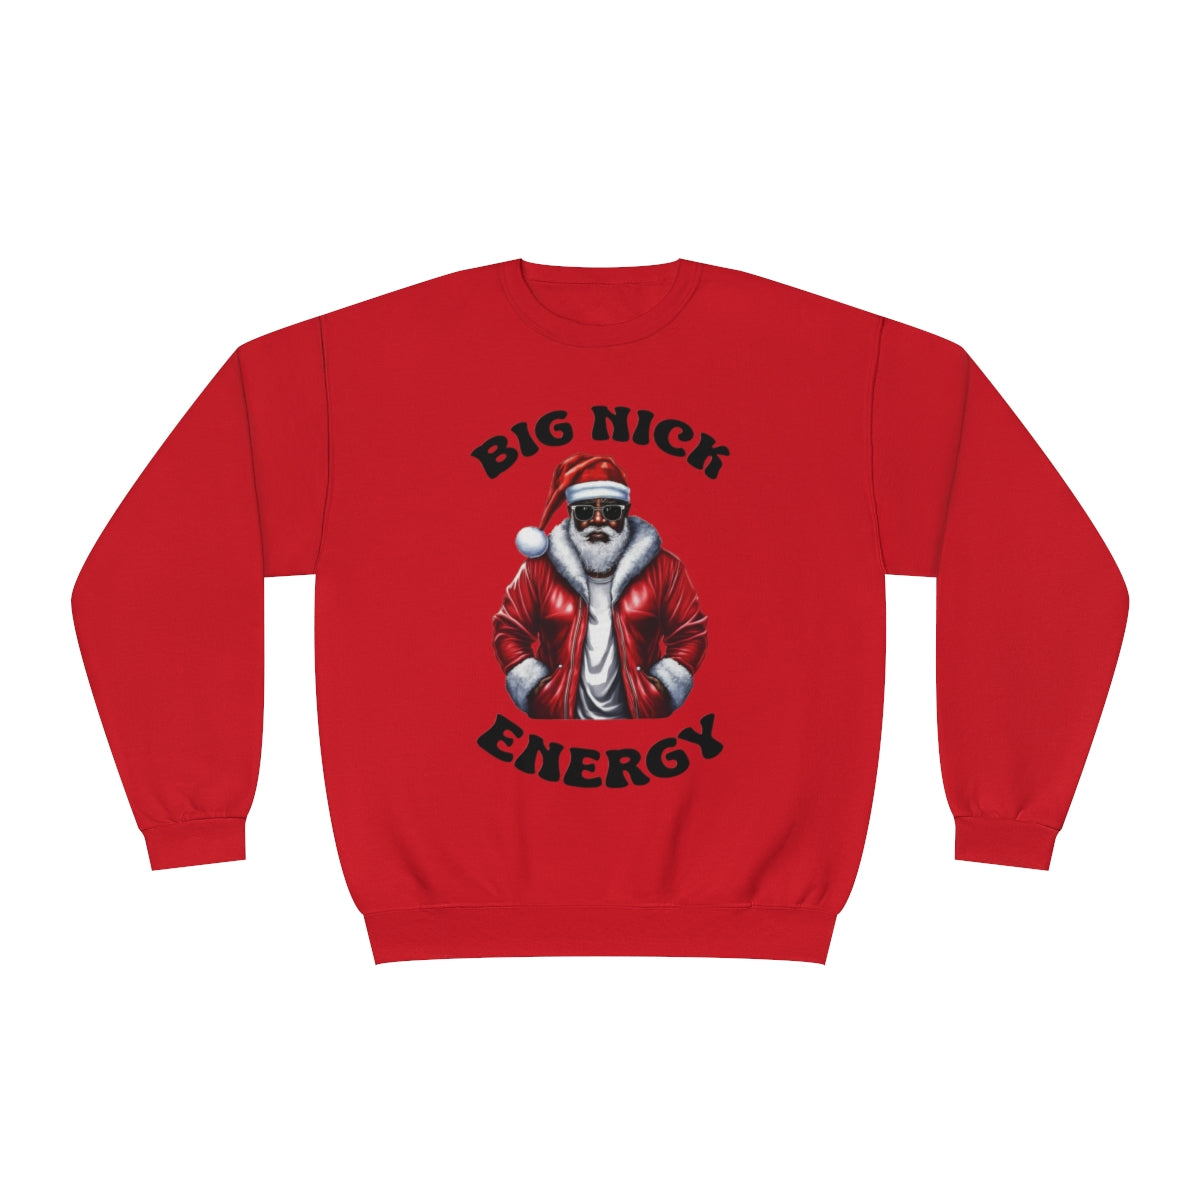 Red Sweatshirt with Black Santa Clause with Sunglasses on that reads "Big Nick Energy"